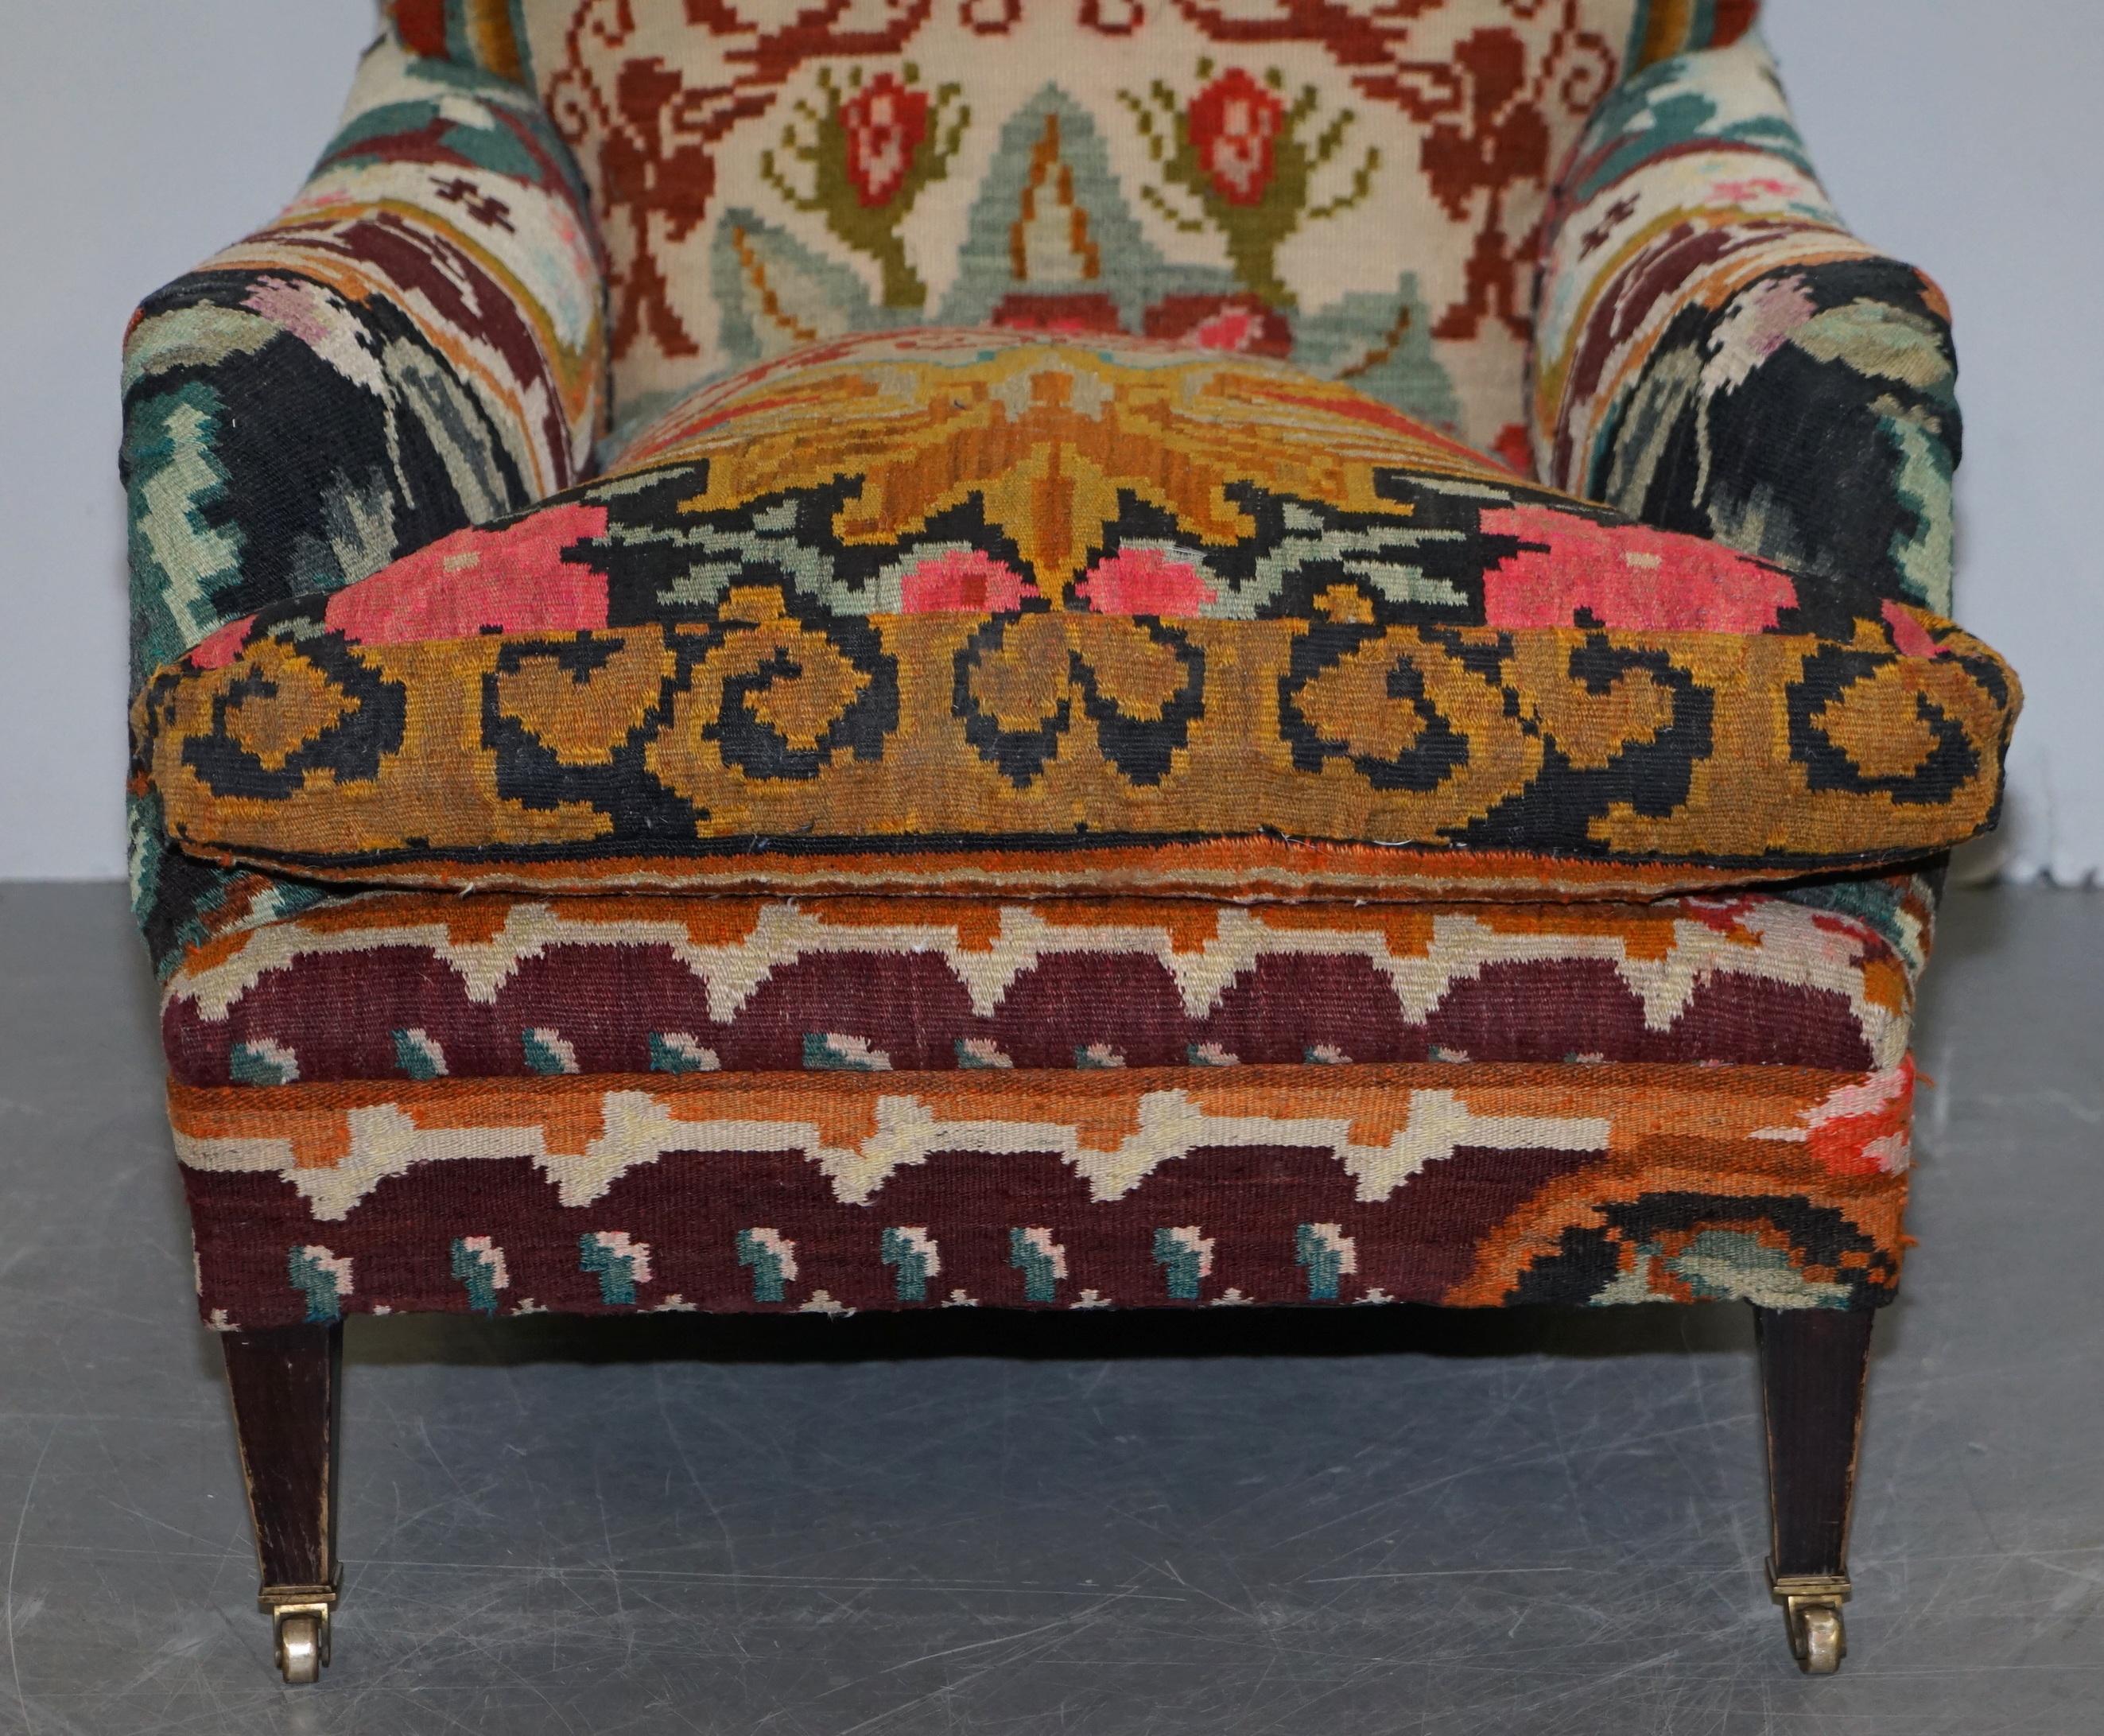 Upholstery Pair of Rare Vintage George Smith Signature Scroll Arm Kilim Aztec Armchairs